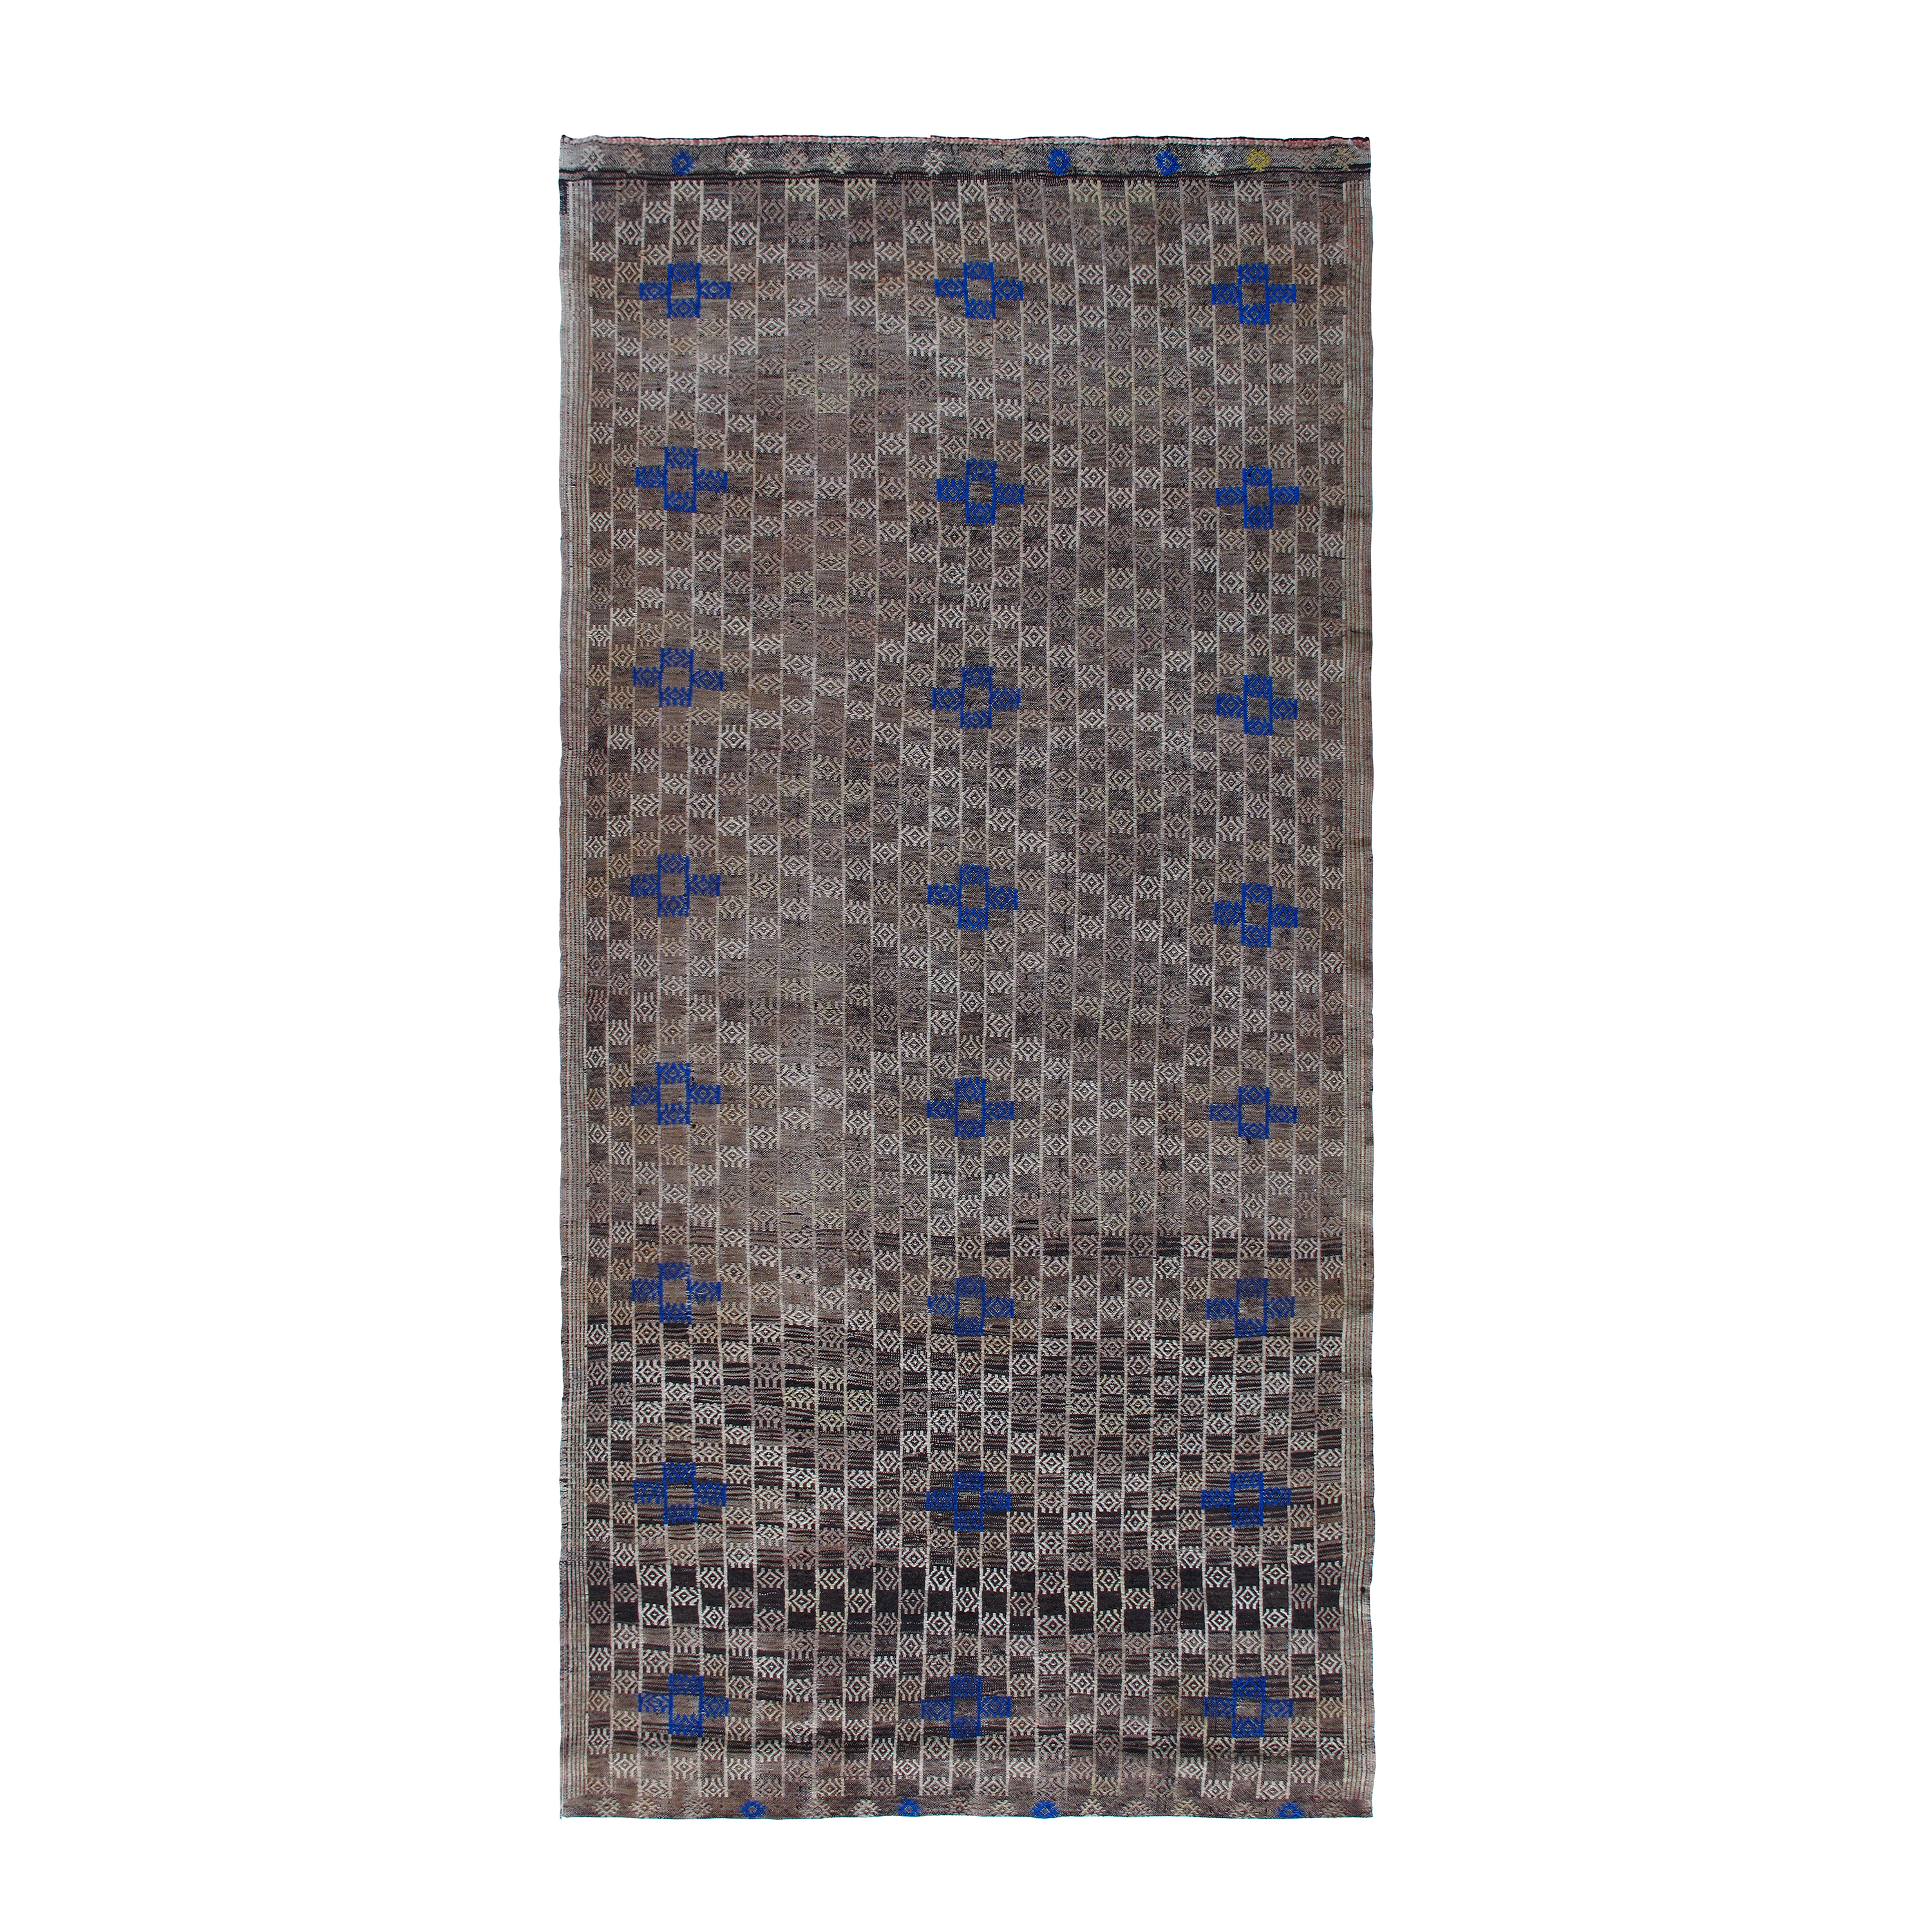 This Vintage Flatweave is hand woven and made of wool and cotton.